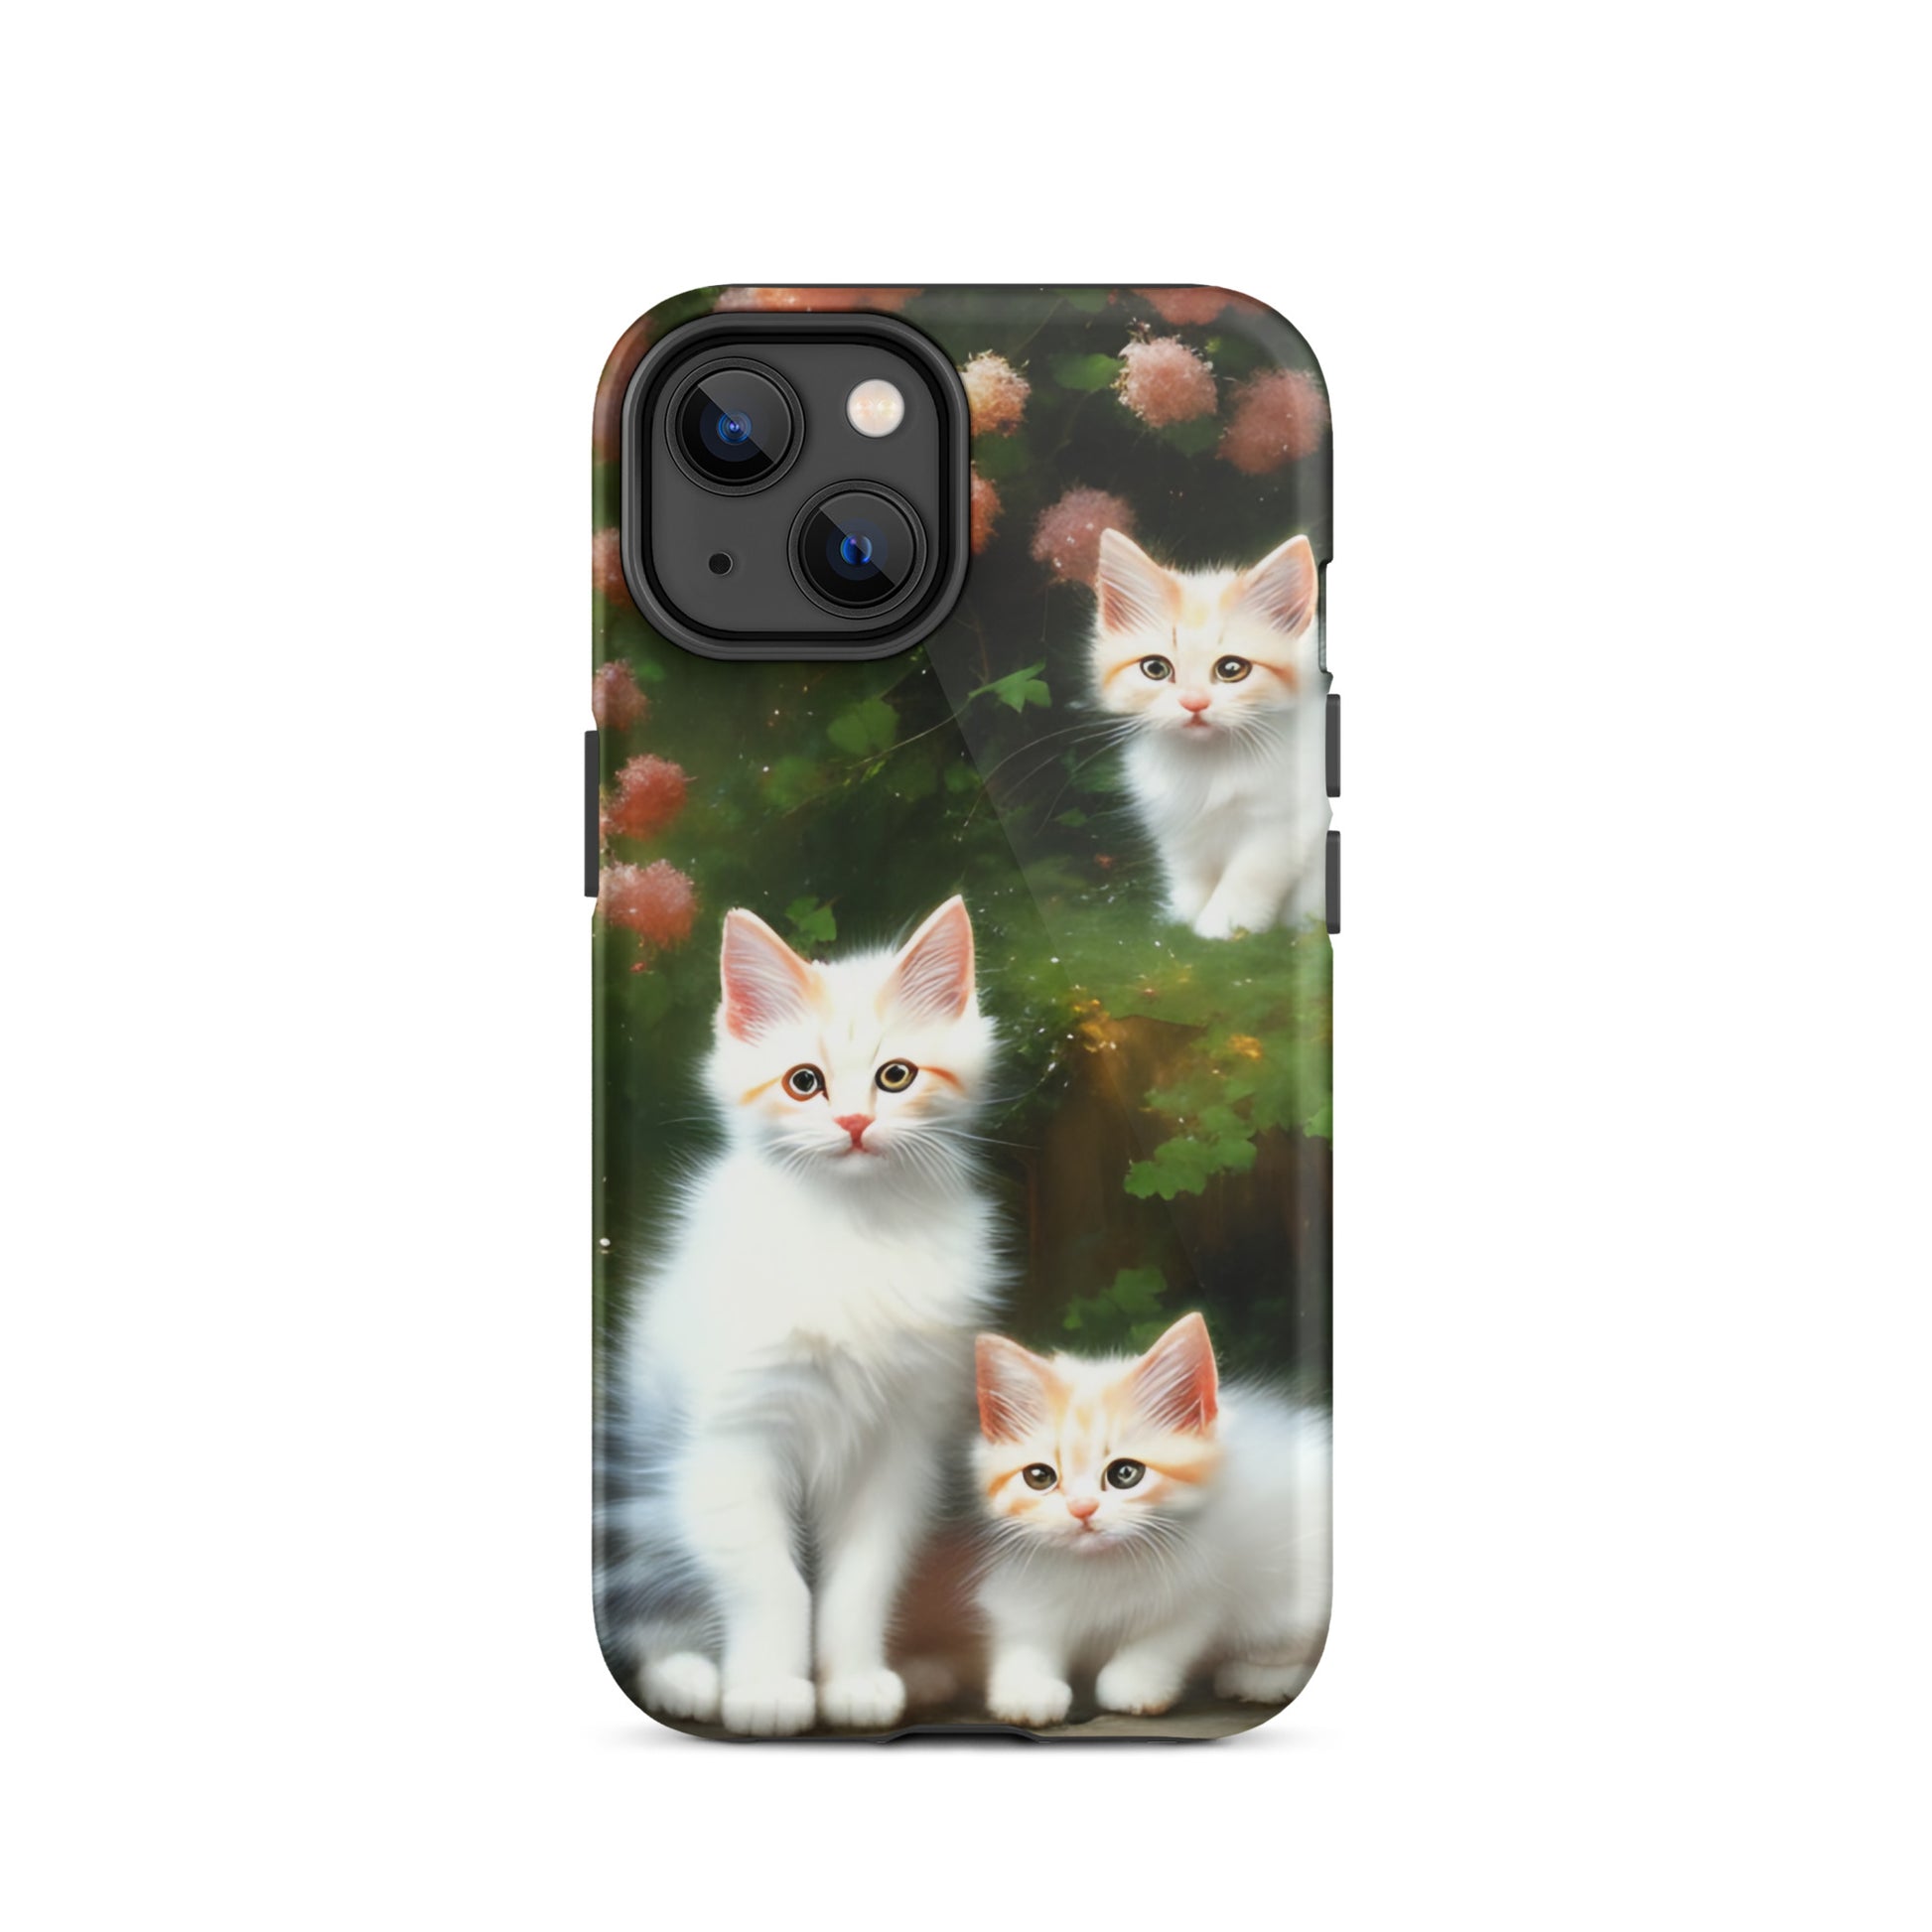 A picture of a iphone tough case with 3 fluffy white and orange kittens and peach colored flowers in the background - glossy-iphone-14-front